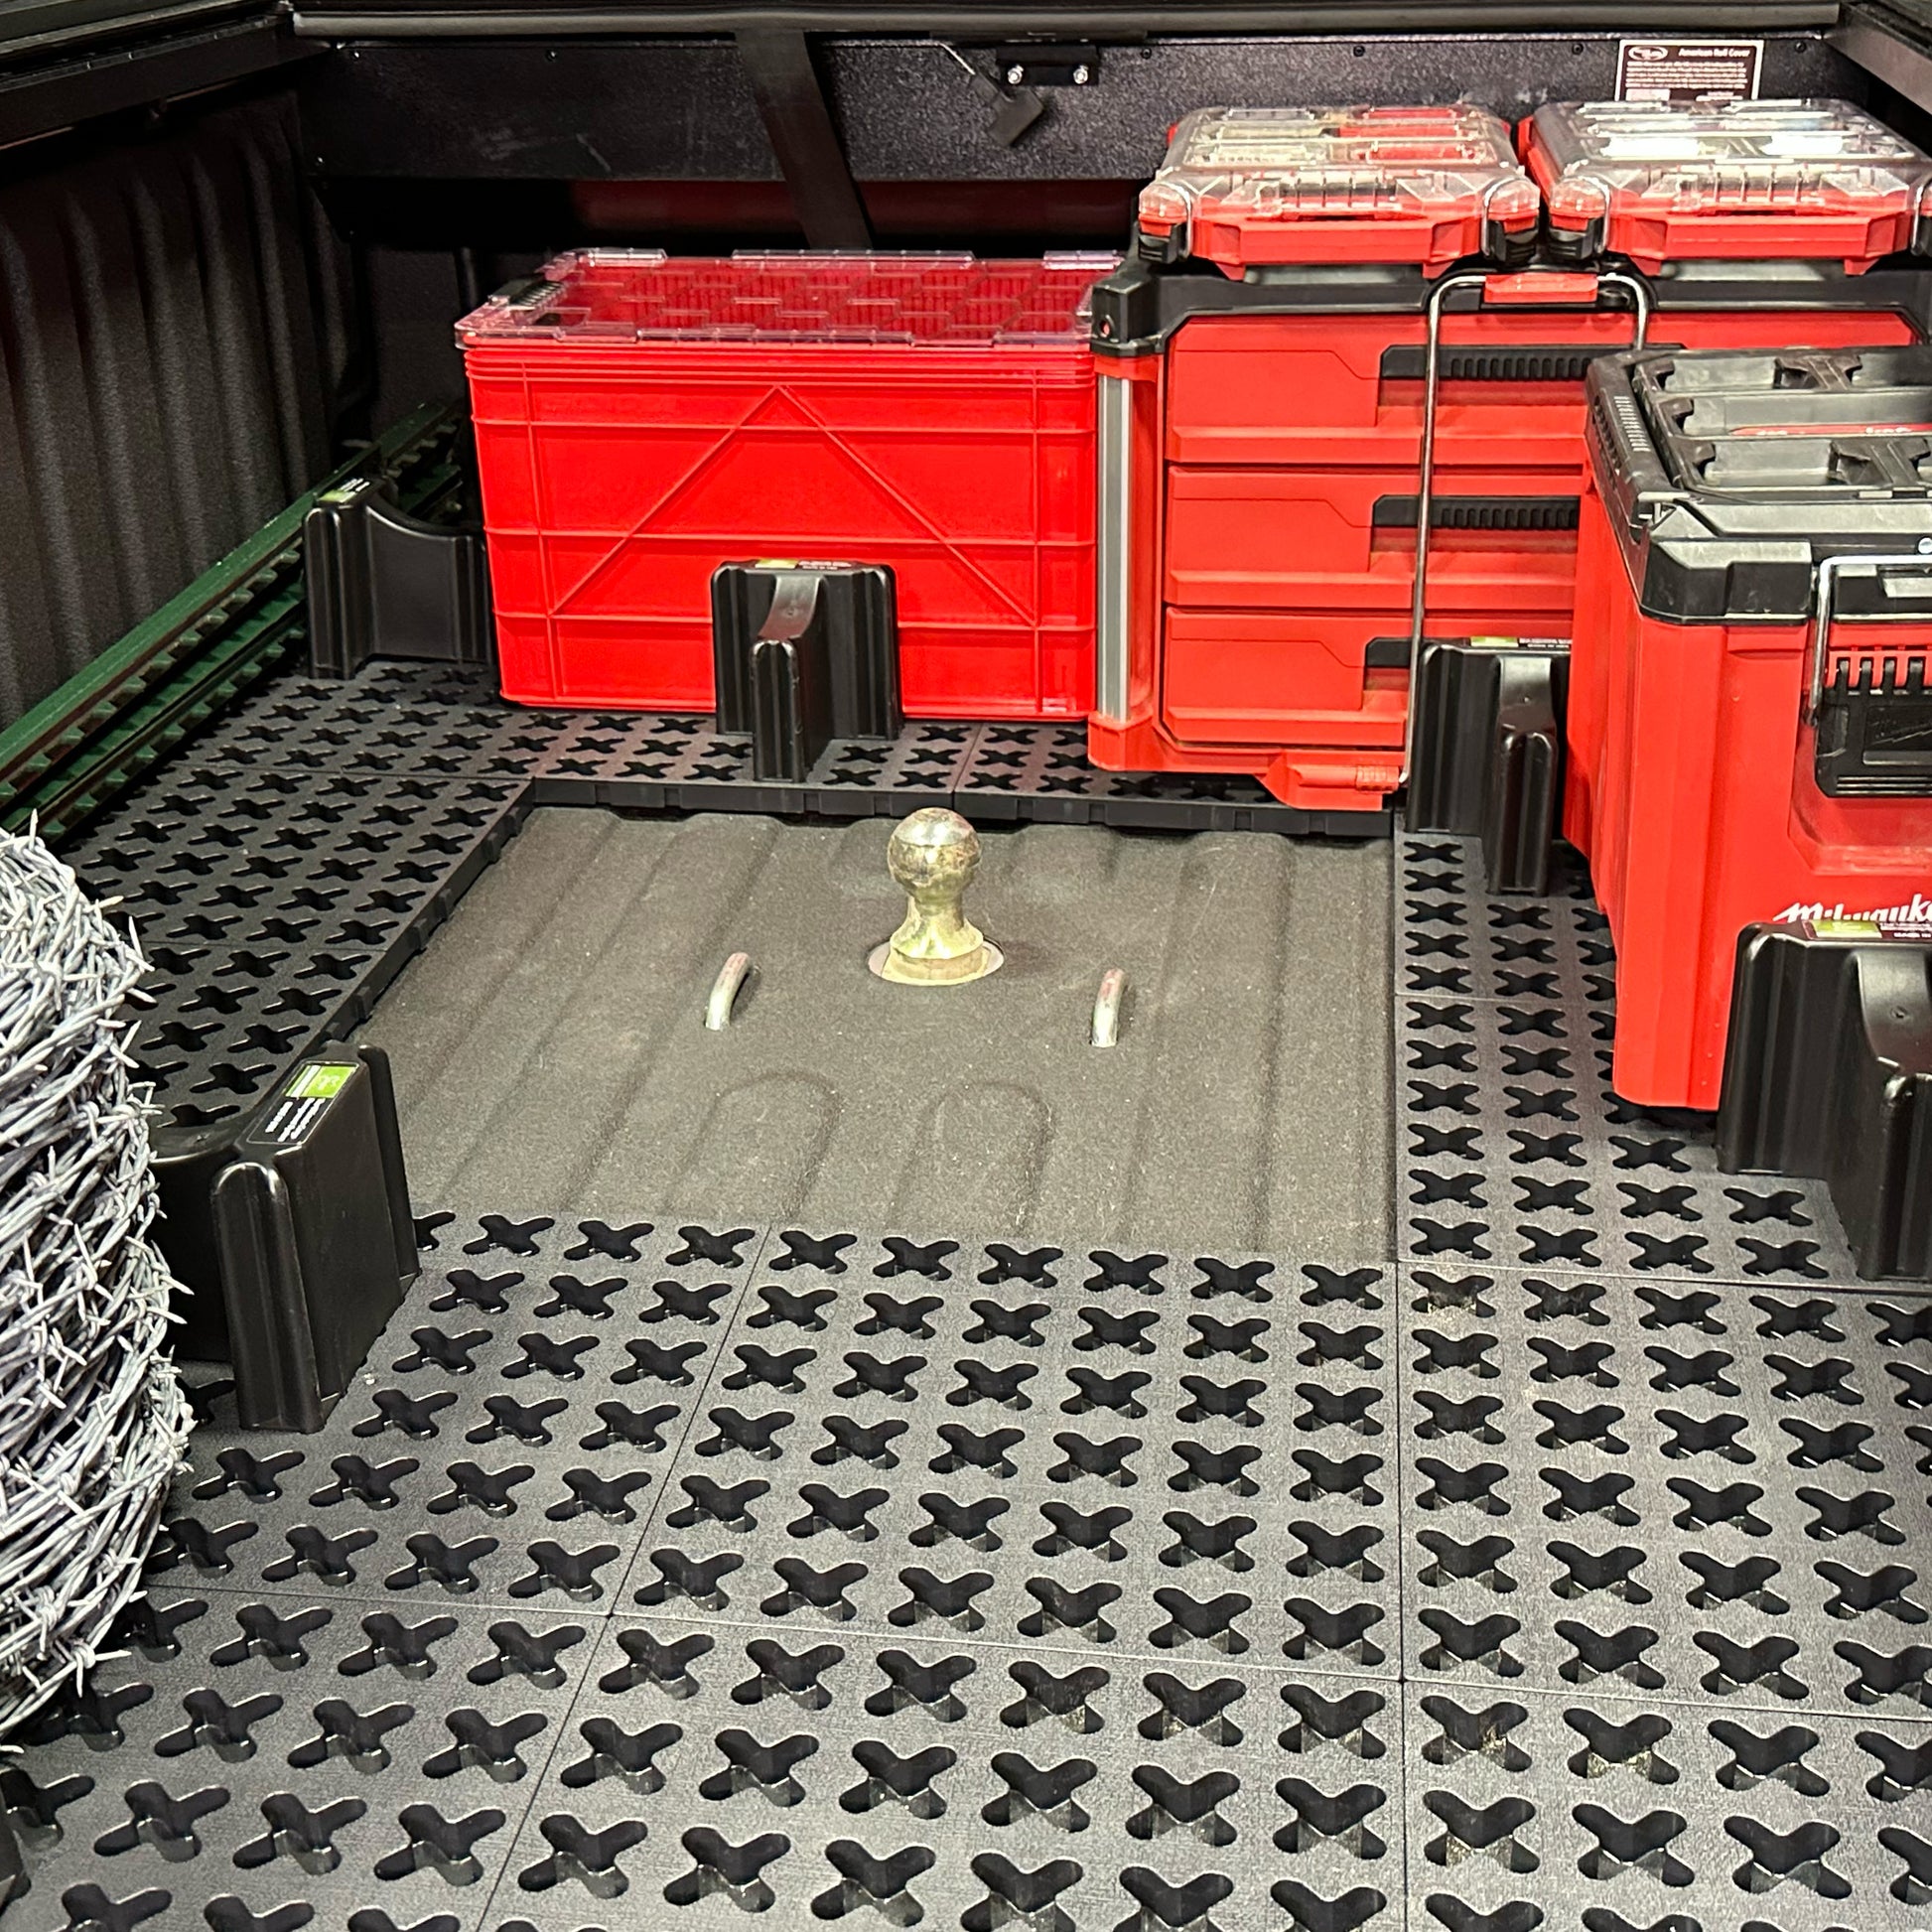 Packout tool boxes, a red milk crate, a spool of barb wire, and t-posts secured in a truck bed around a gooseneck hitch.